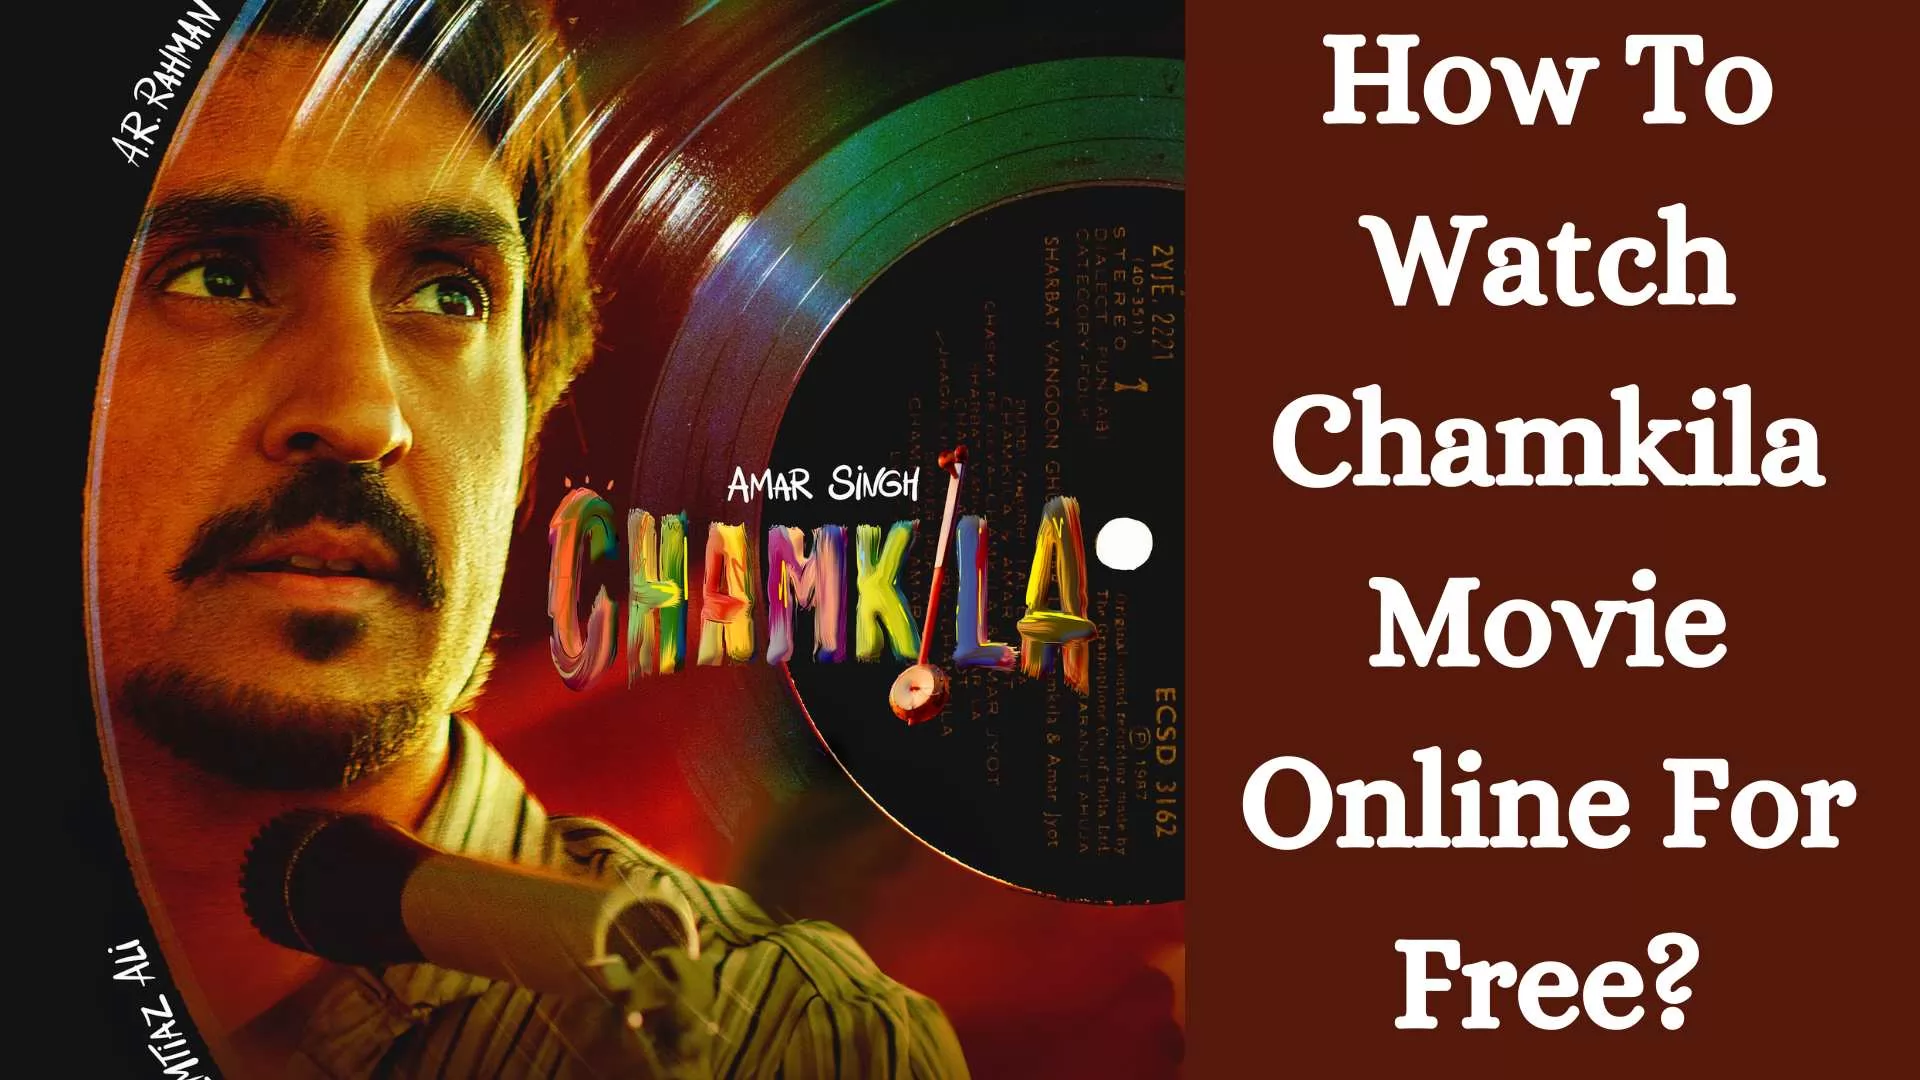 How To Watch Chamkila Movie Online For Free?